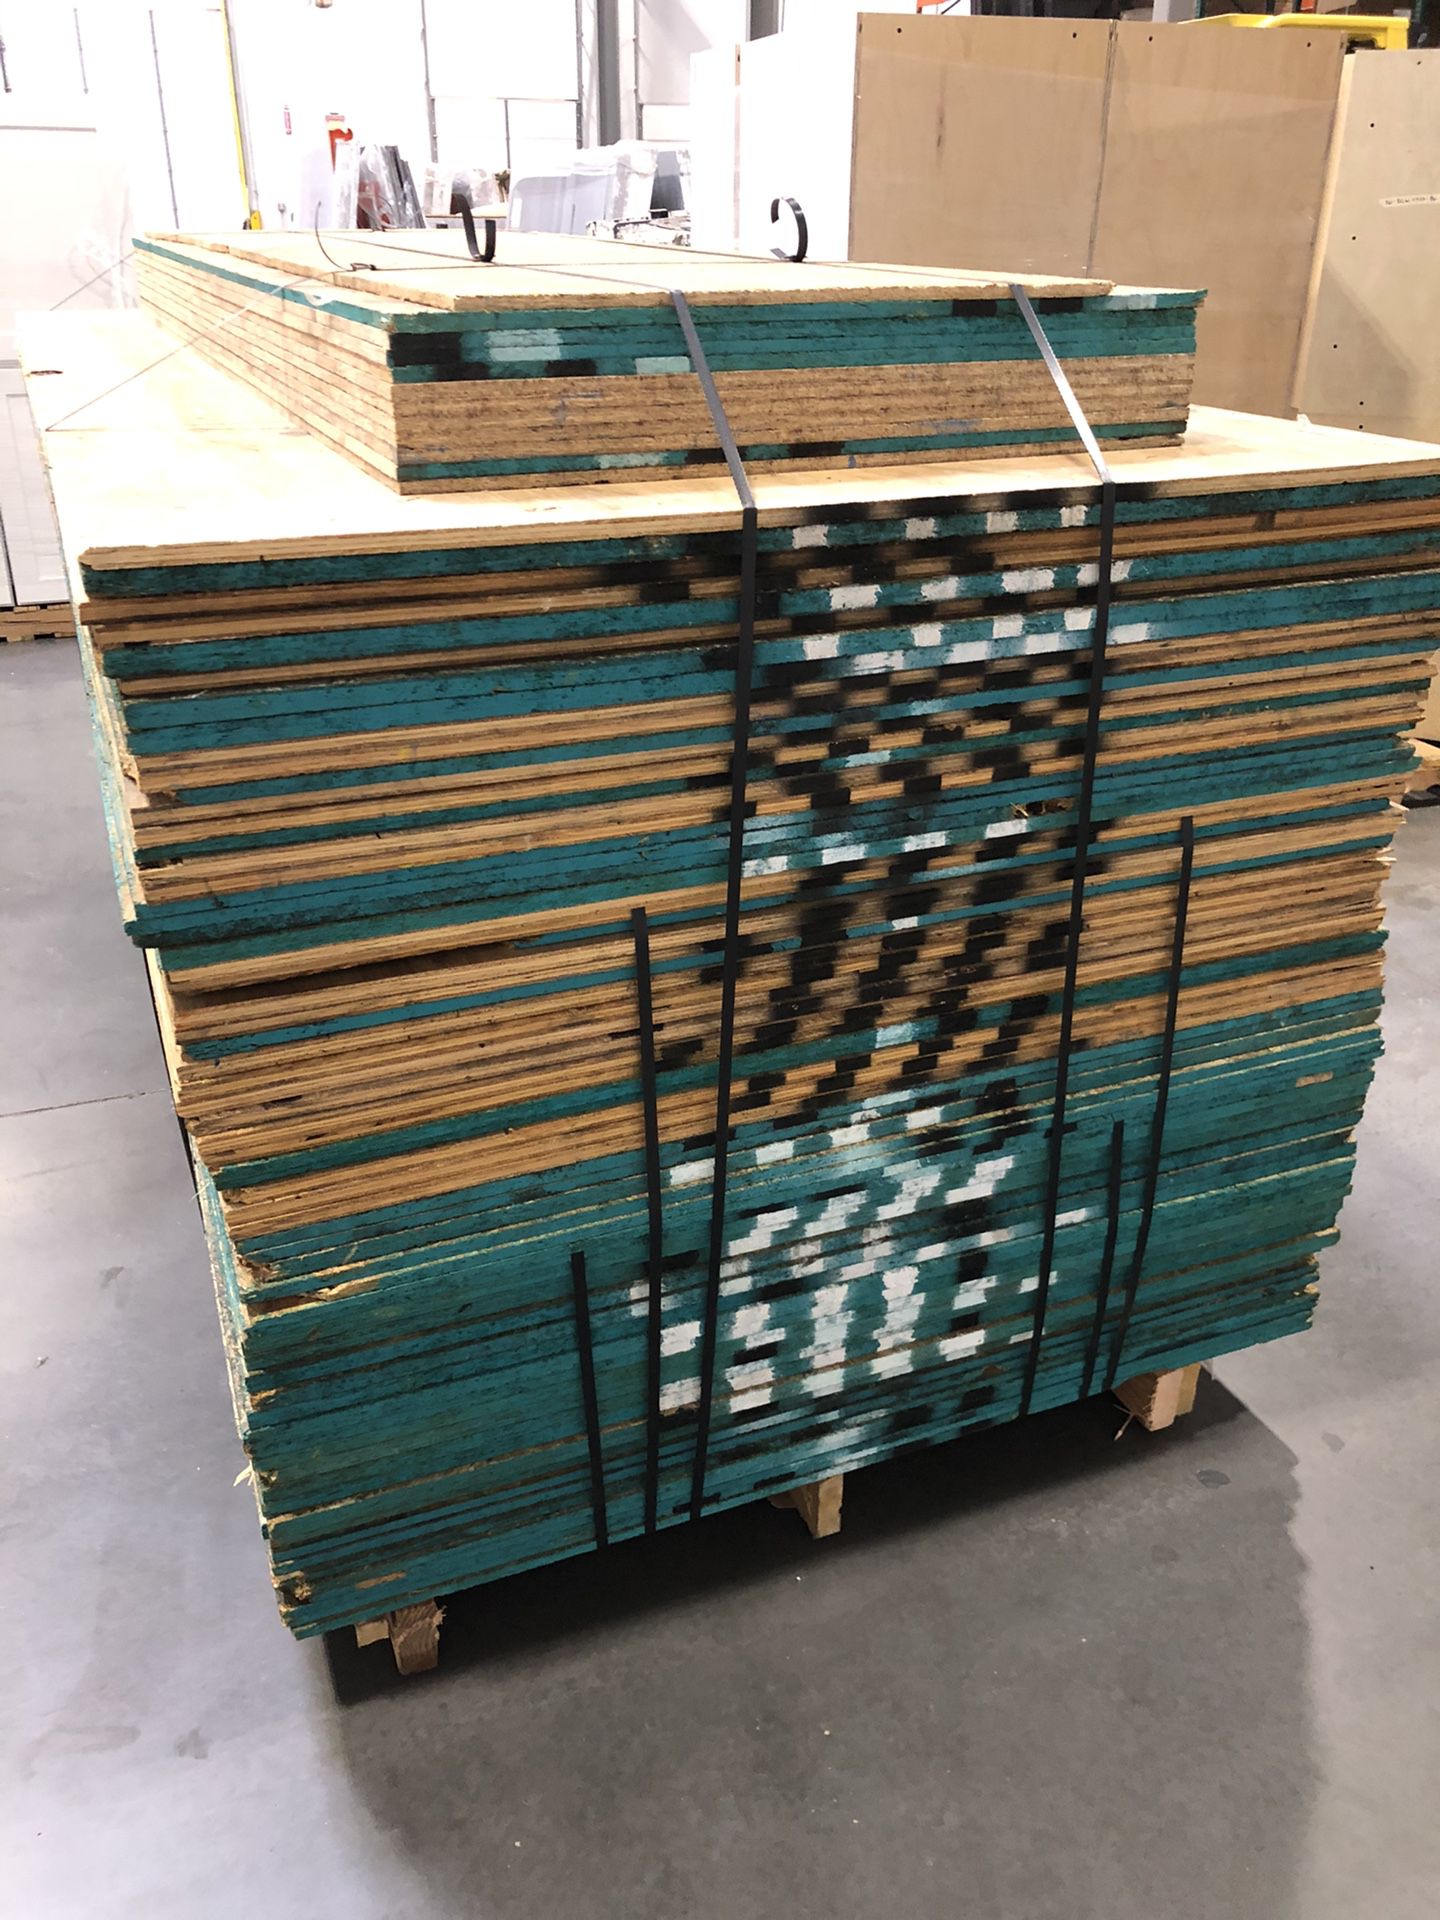 Full Pallet Of New 3/4 & 1/2” OSB & Plywood  (mixed) Approximately 67pcs  4x8 Sheets